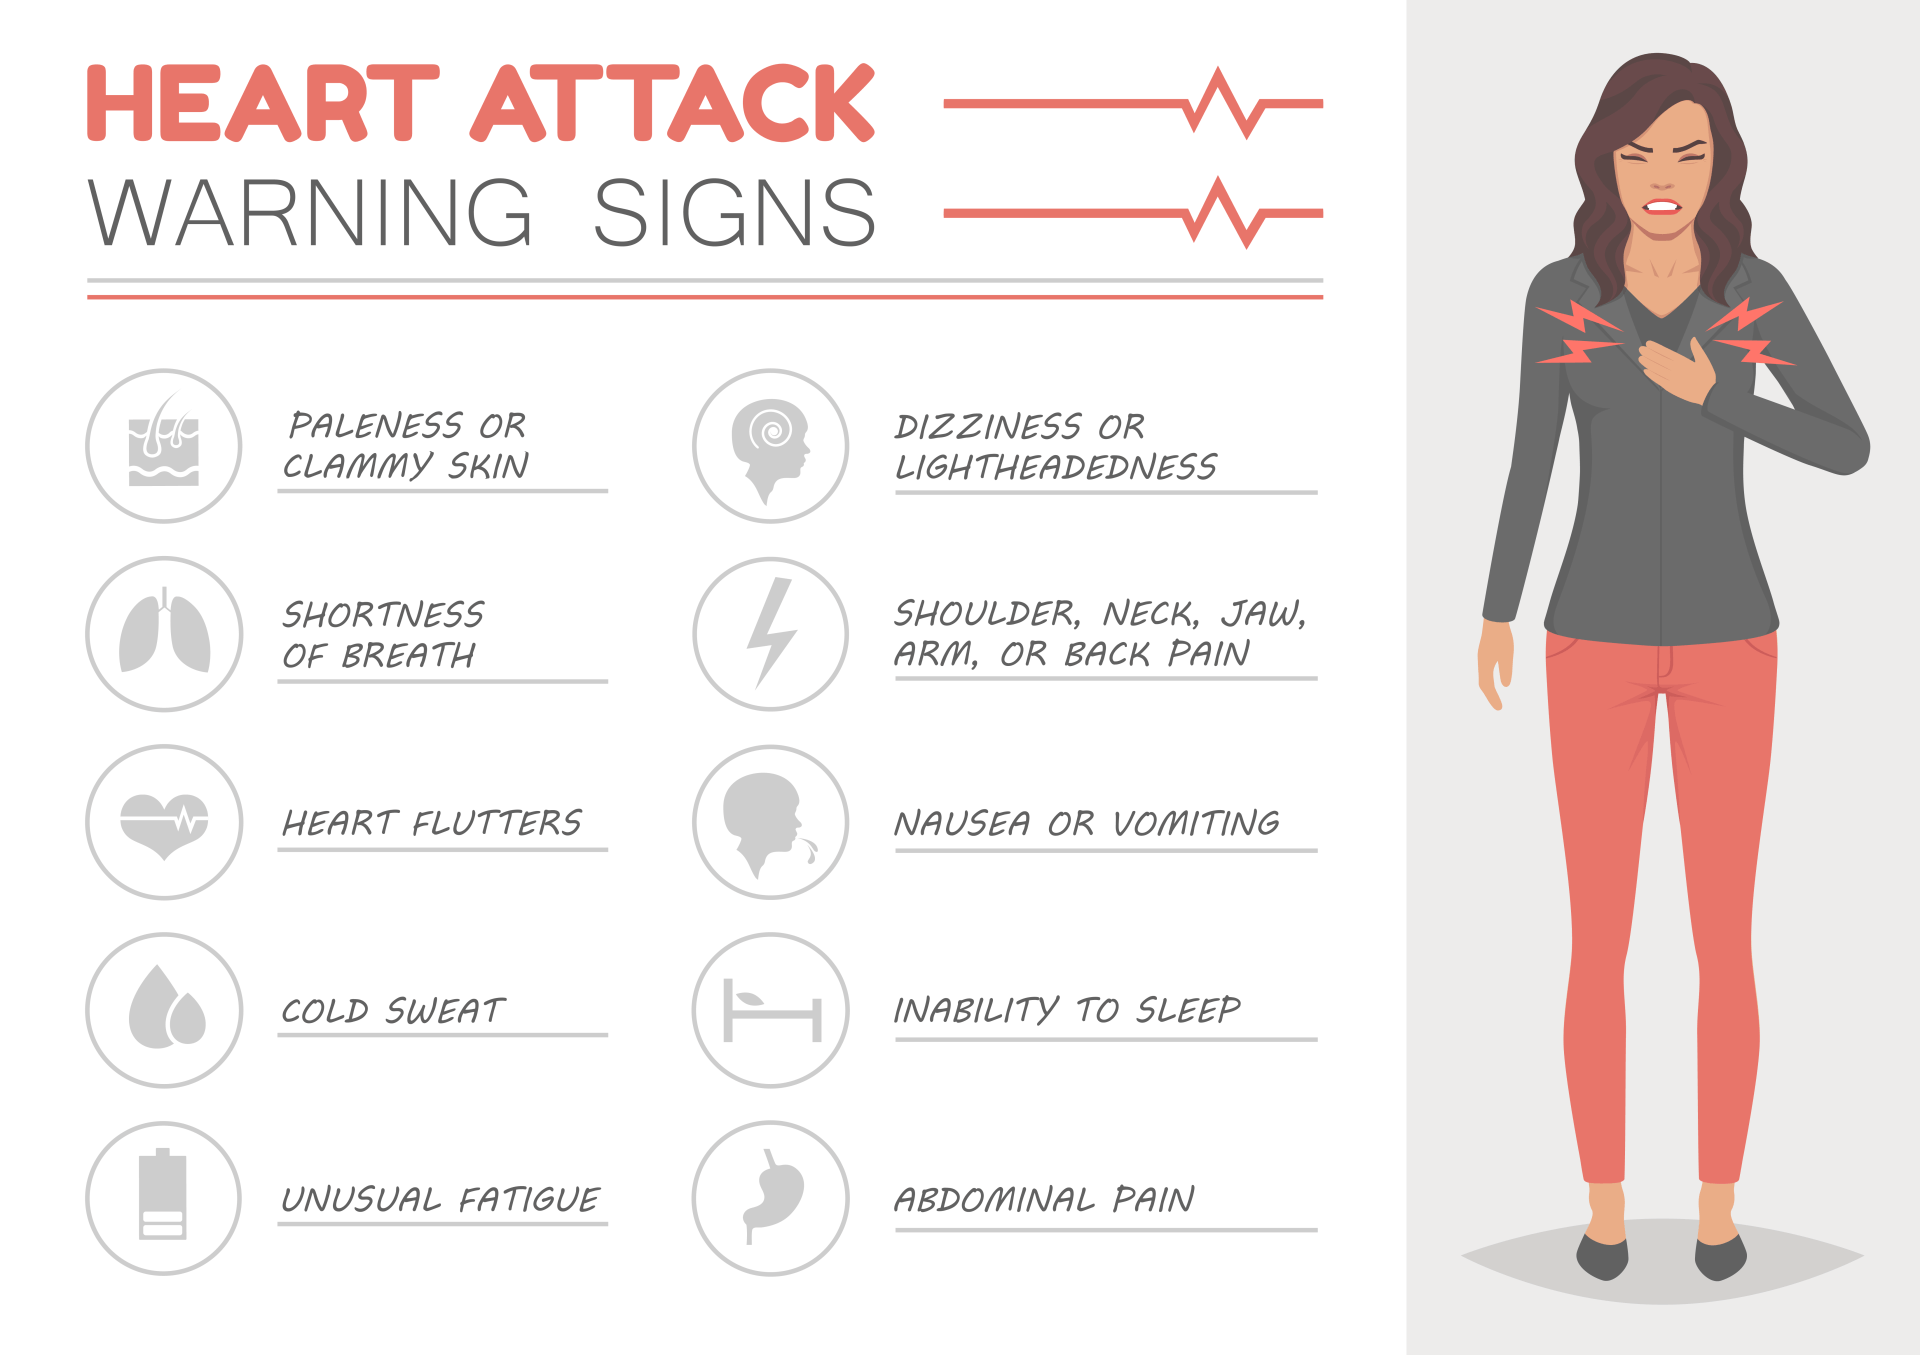 Heart+Attack+Warning+Signs+ +Lima+Lubbock